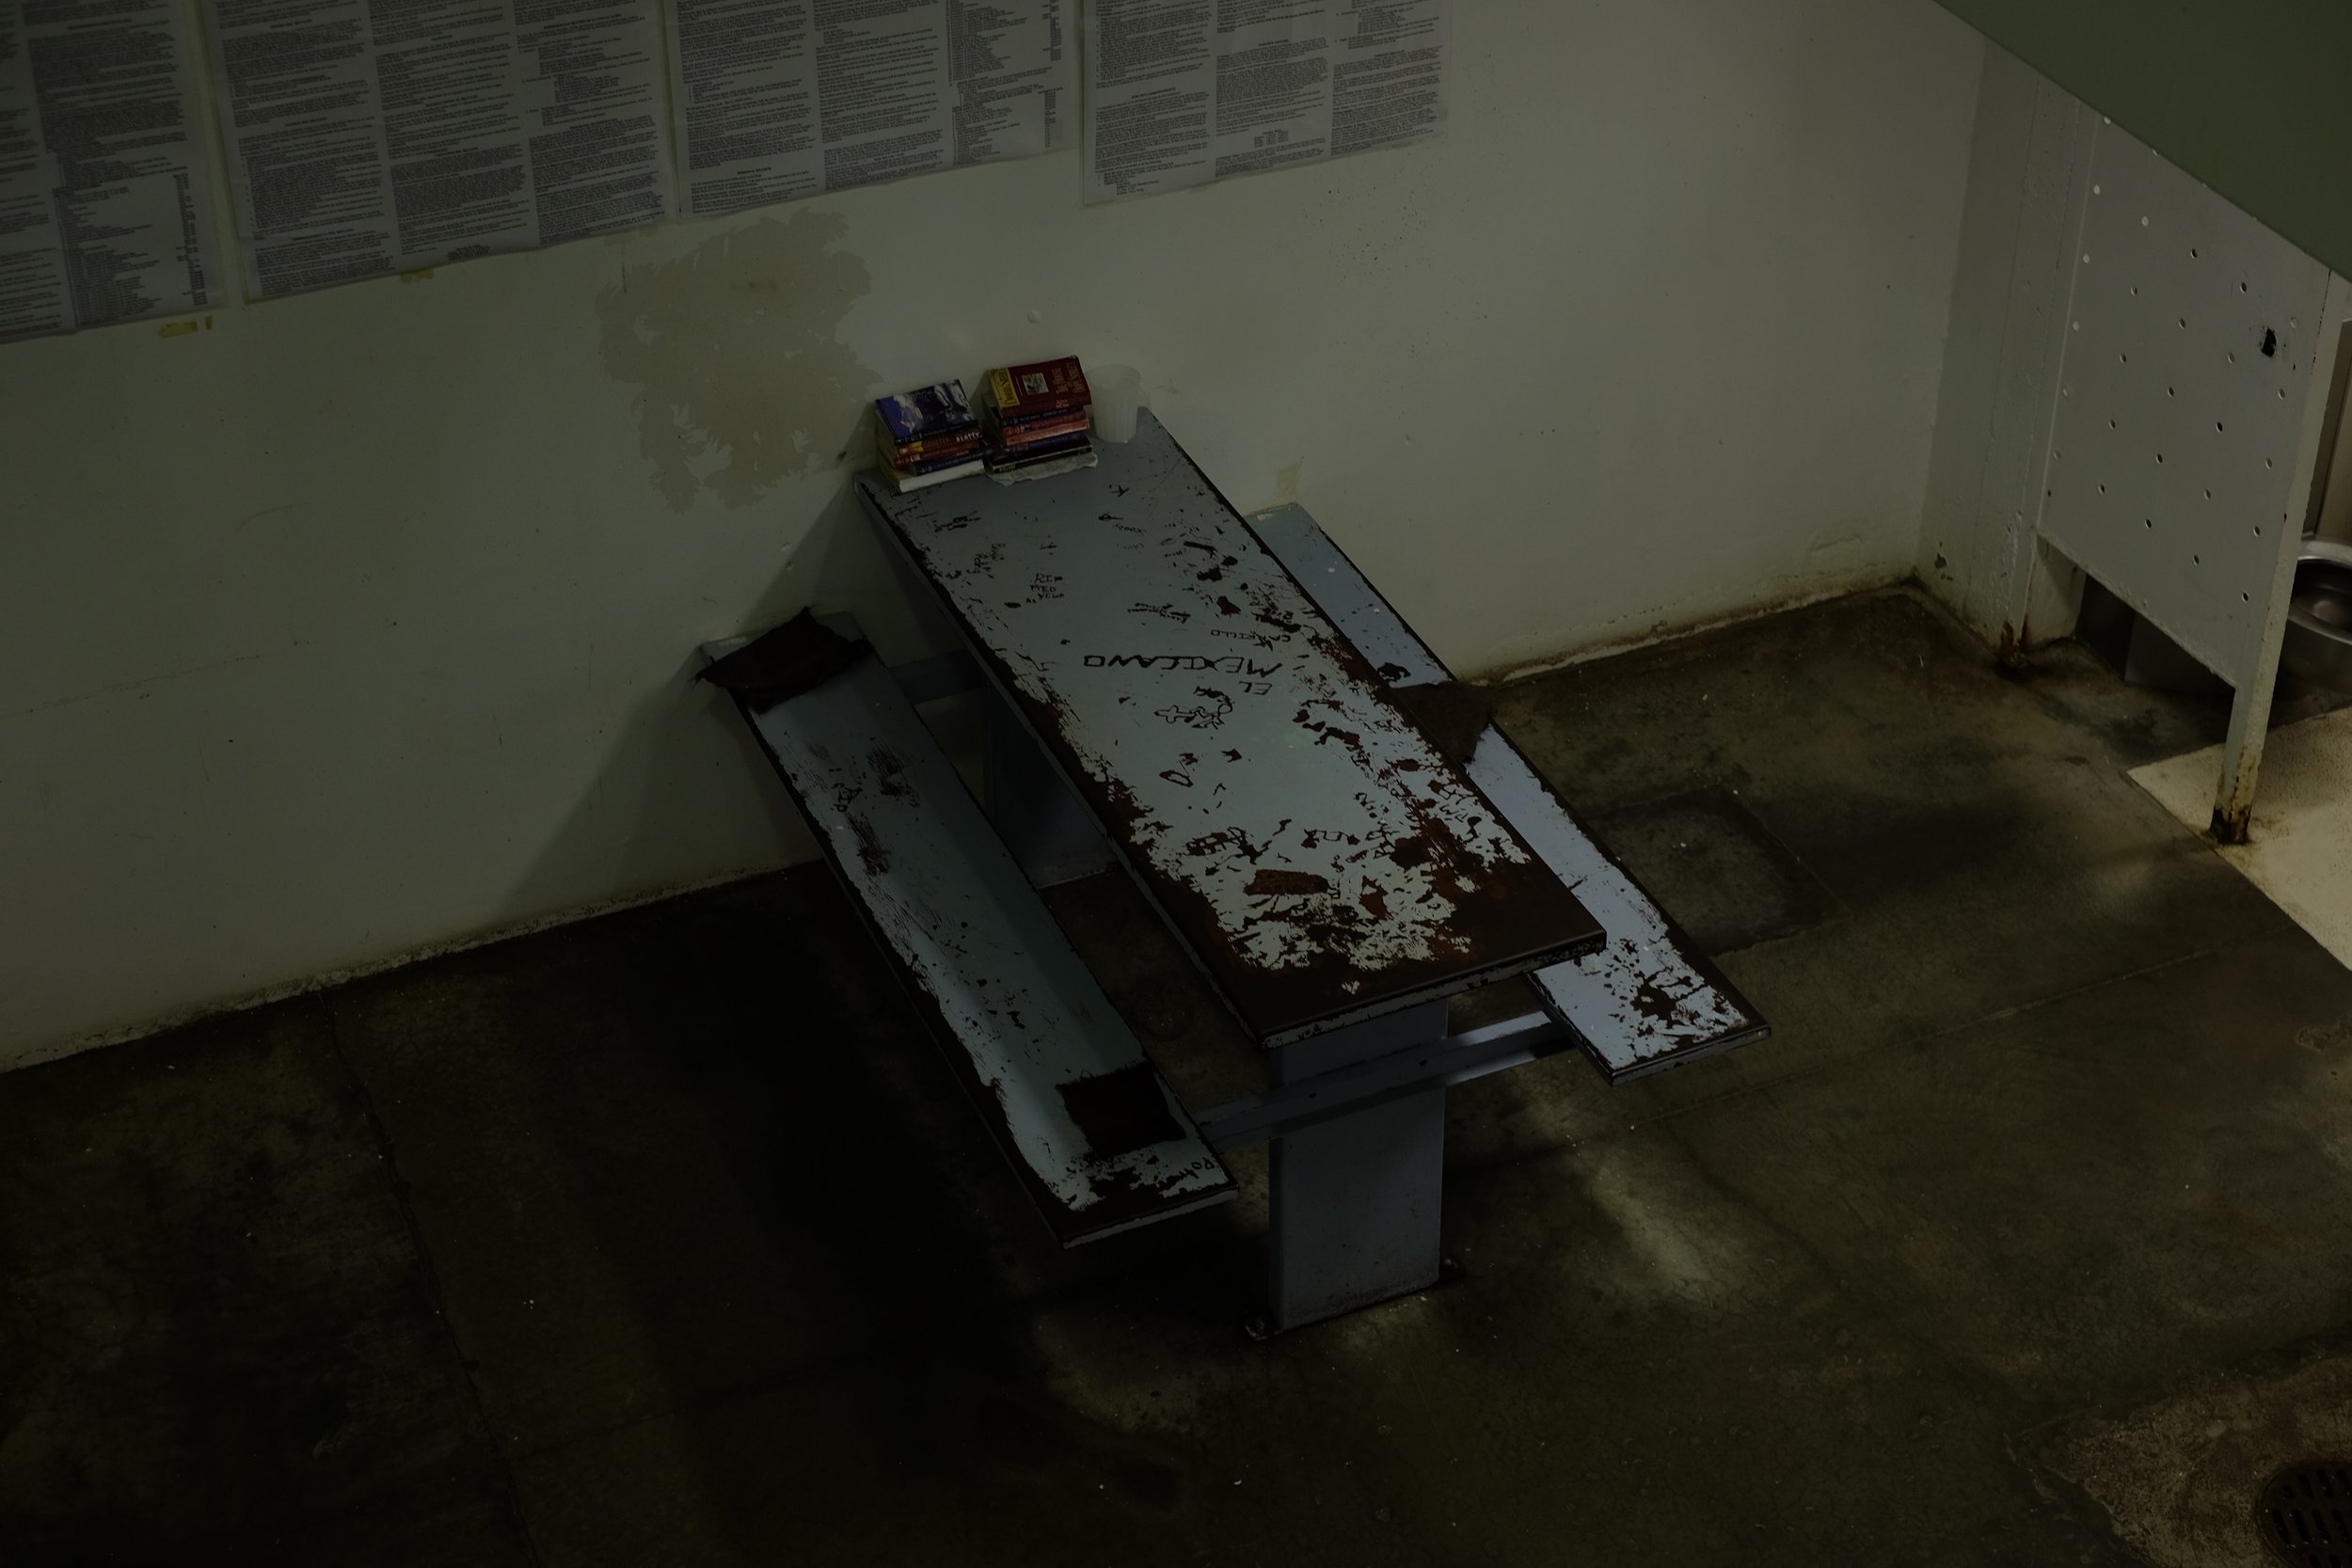  "El Mexicano" is carved into a table in c-block, one of the all-female dorms. The flaking paint on the tables smells and has been giving the inmates headaches, the women said. Christmas Day, 2015. 